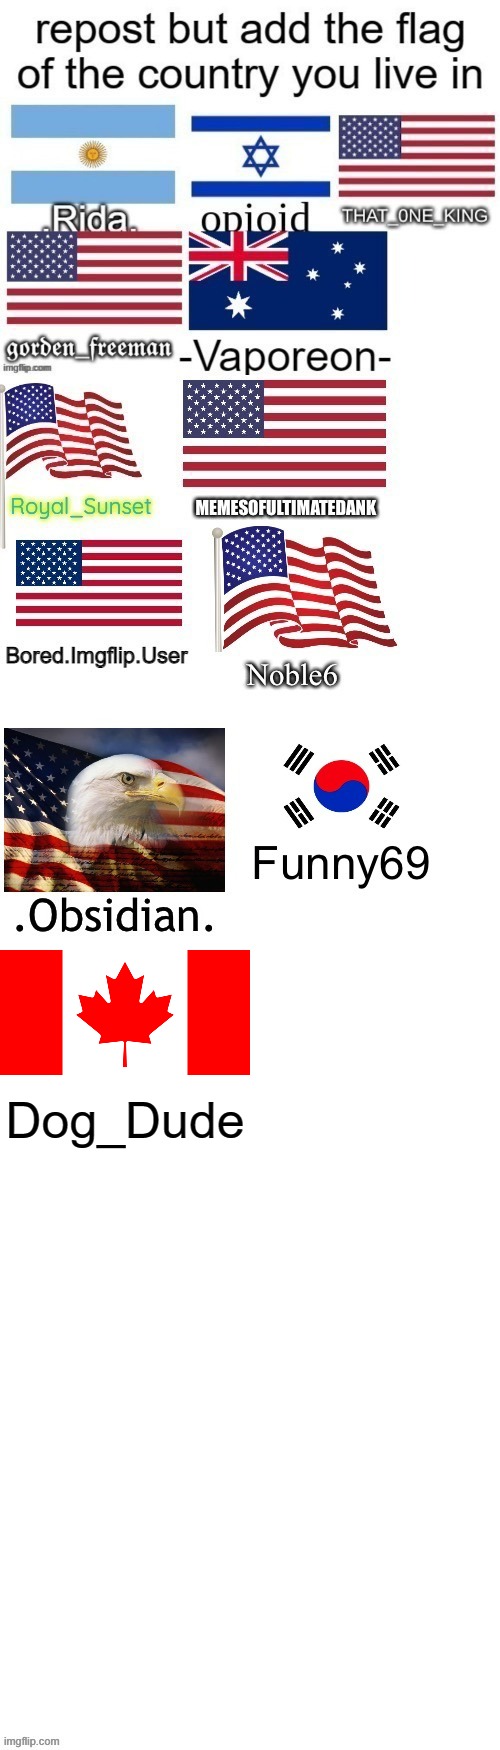 I live in Canada | Dog_Dude | image tagged in canada | made w/ Imgflip meme maker